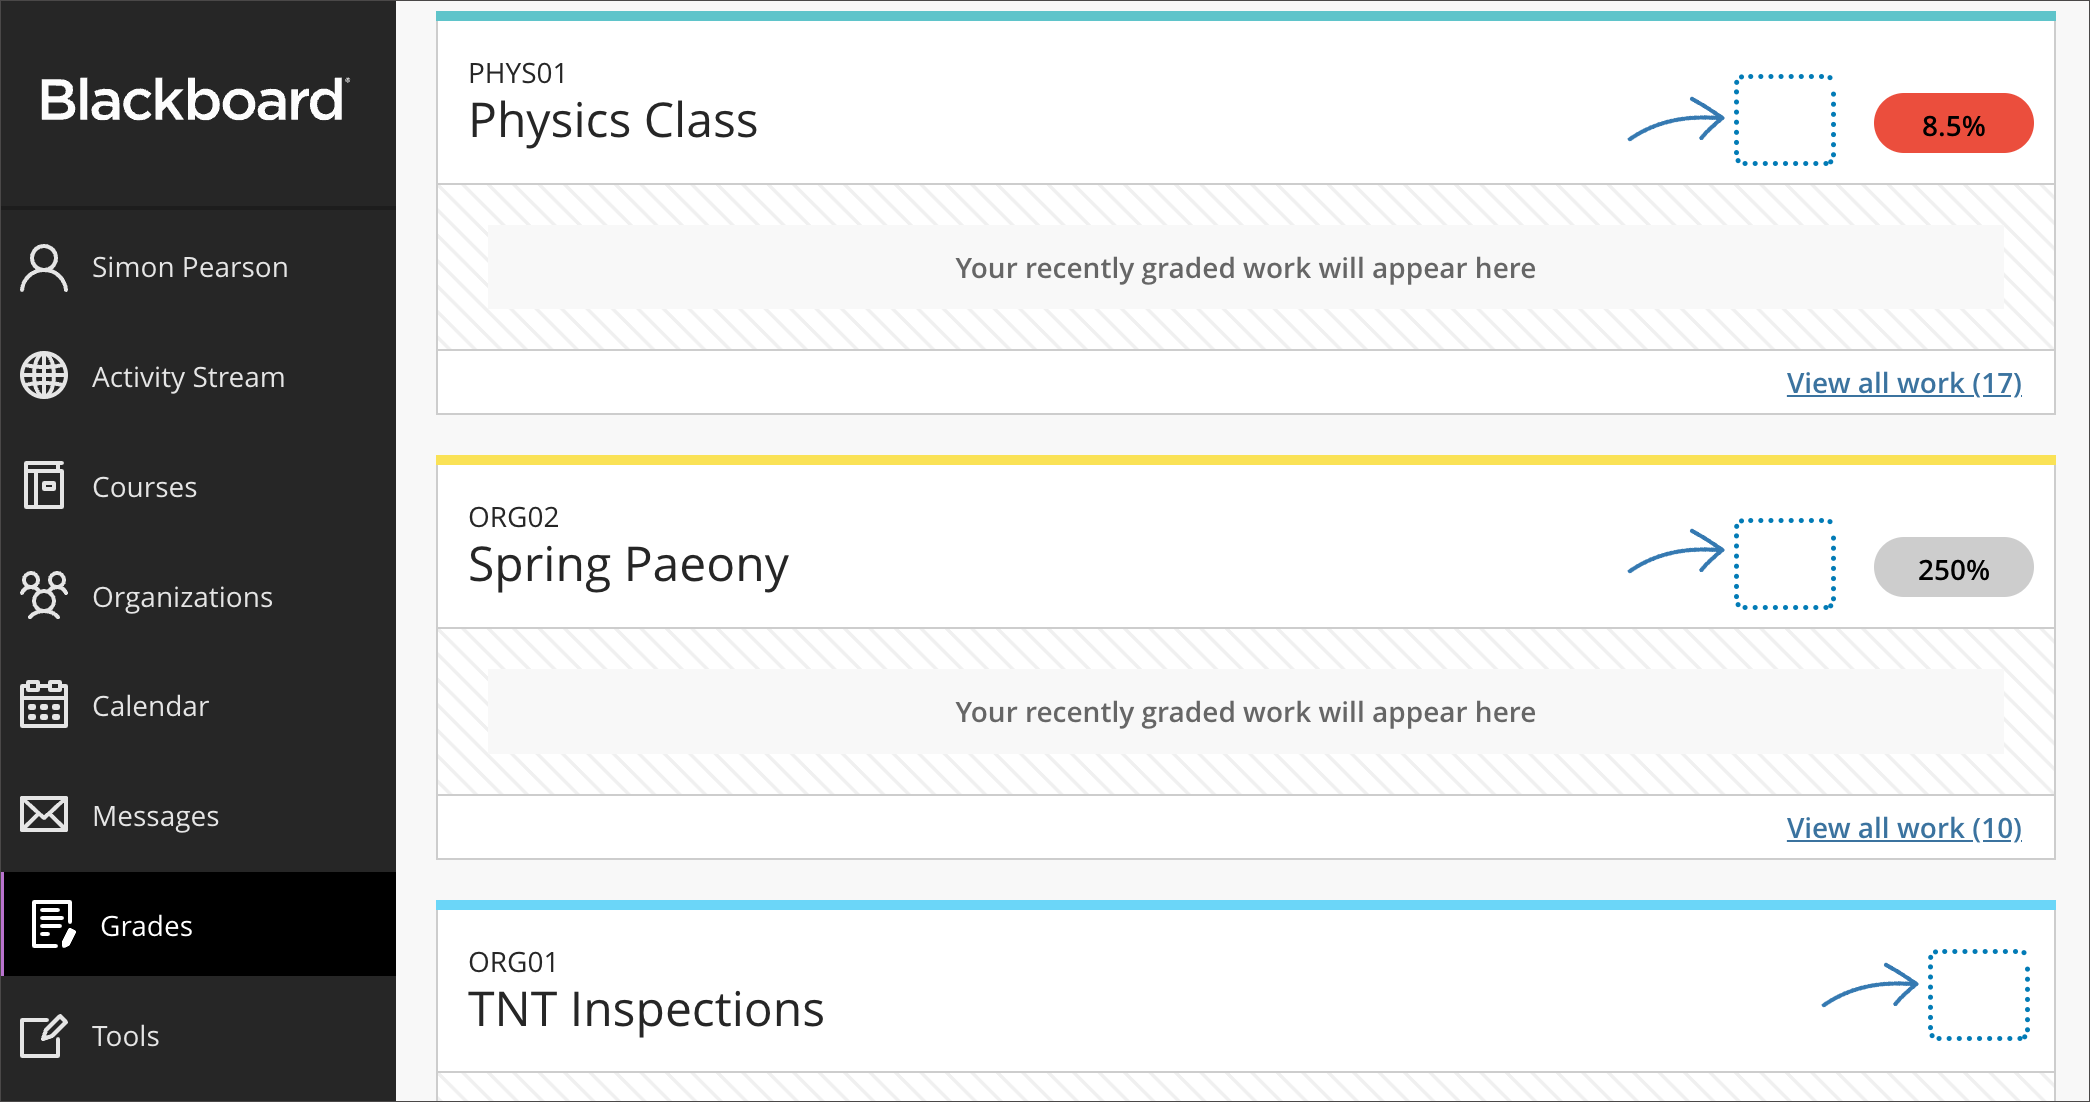 When “How am I doing?” is set to “Off,” the pie chart icon in the Grades tab of the base navigation is removed